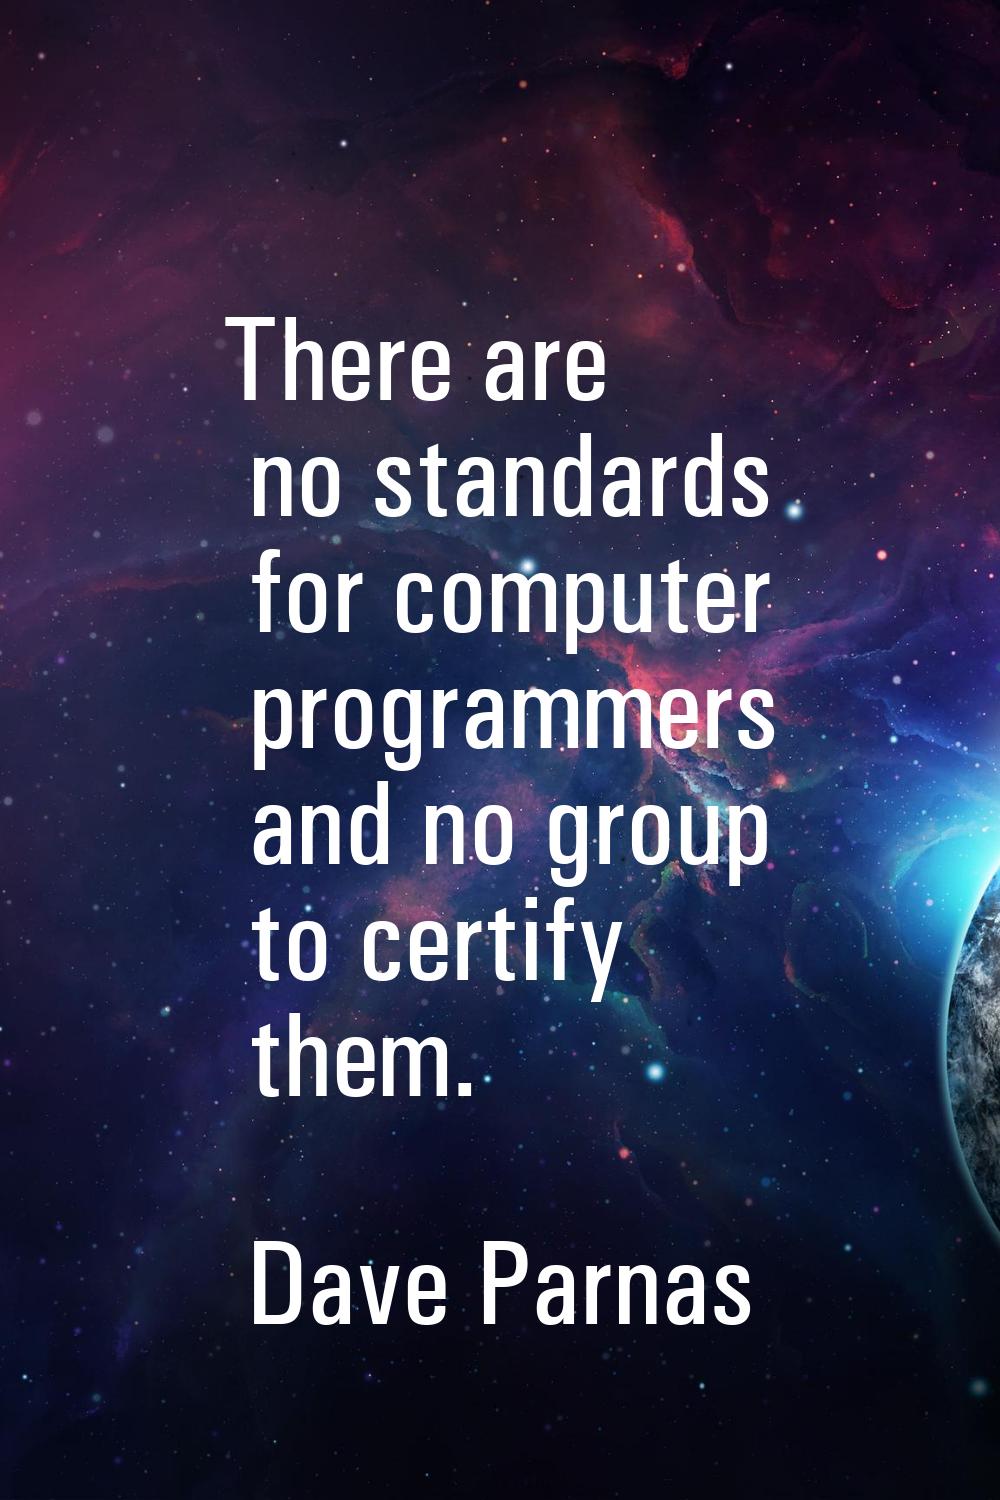 There are no standards for computer programmers and no group to certify them.